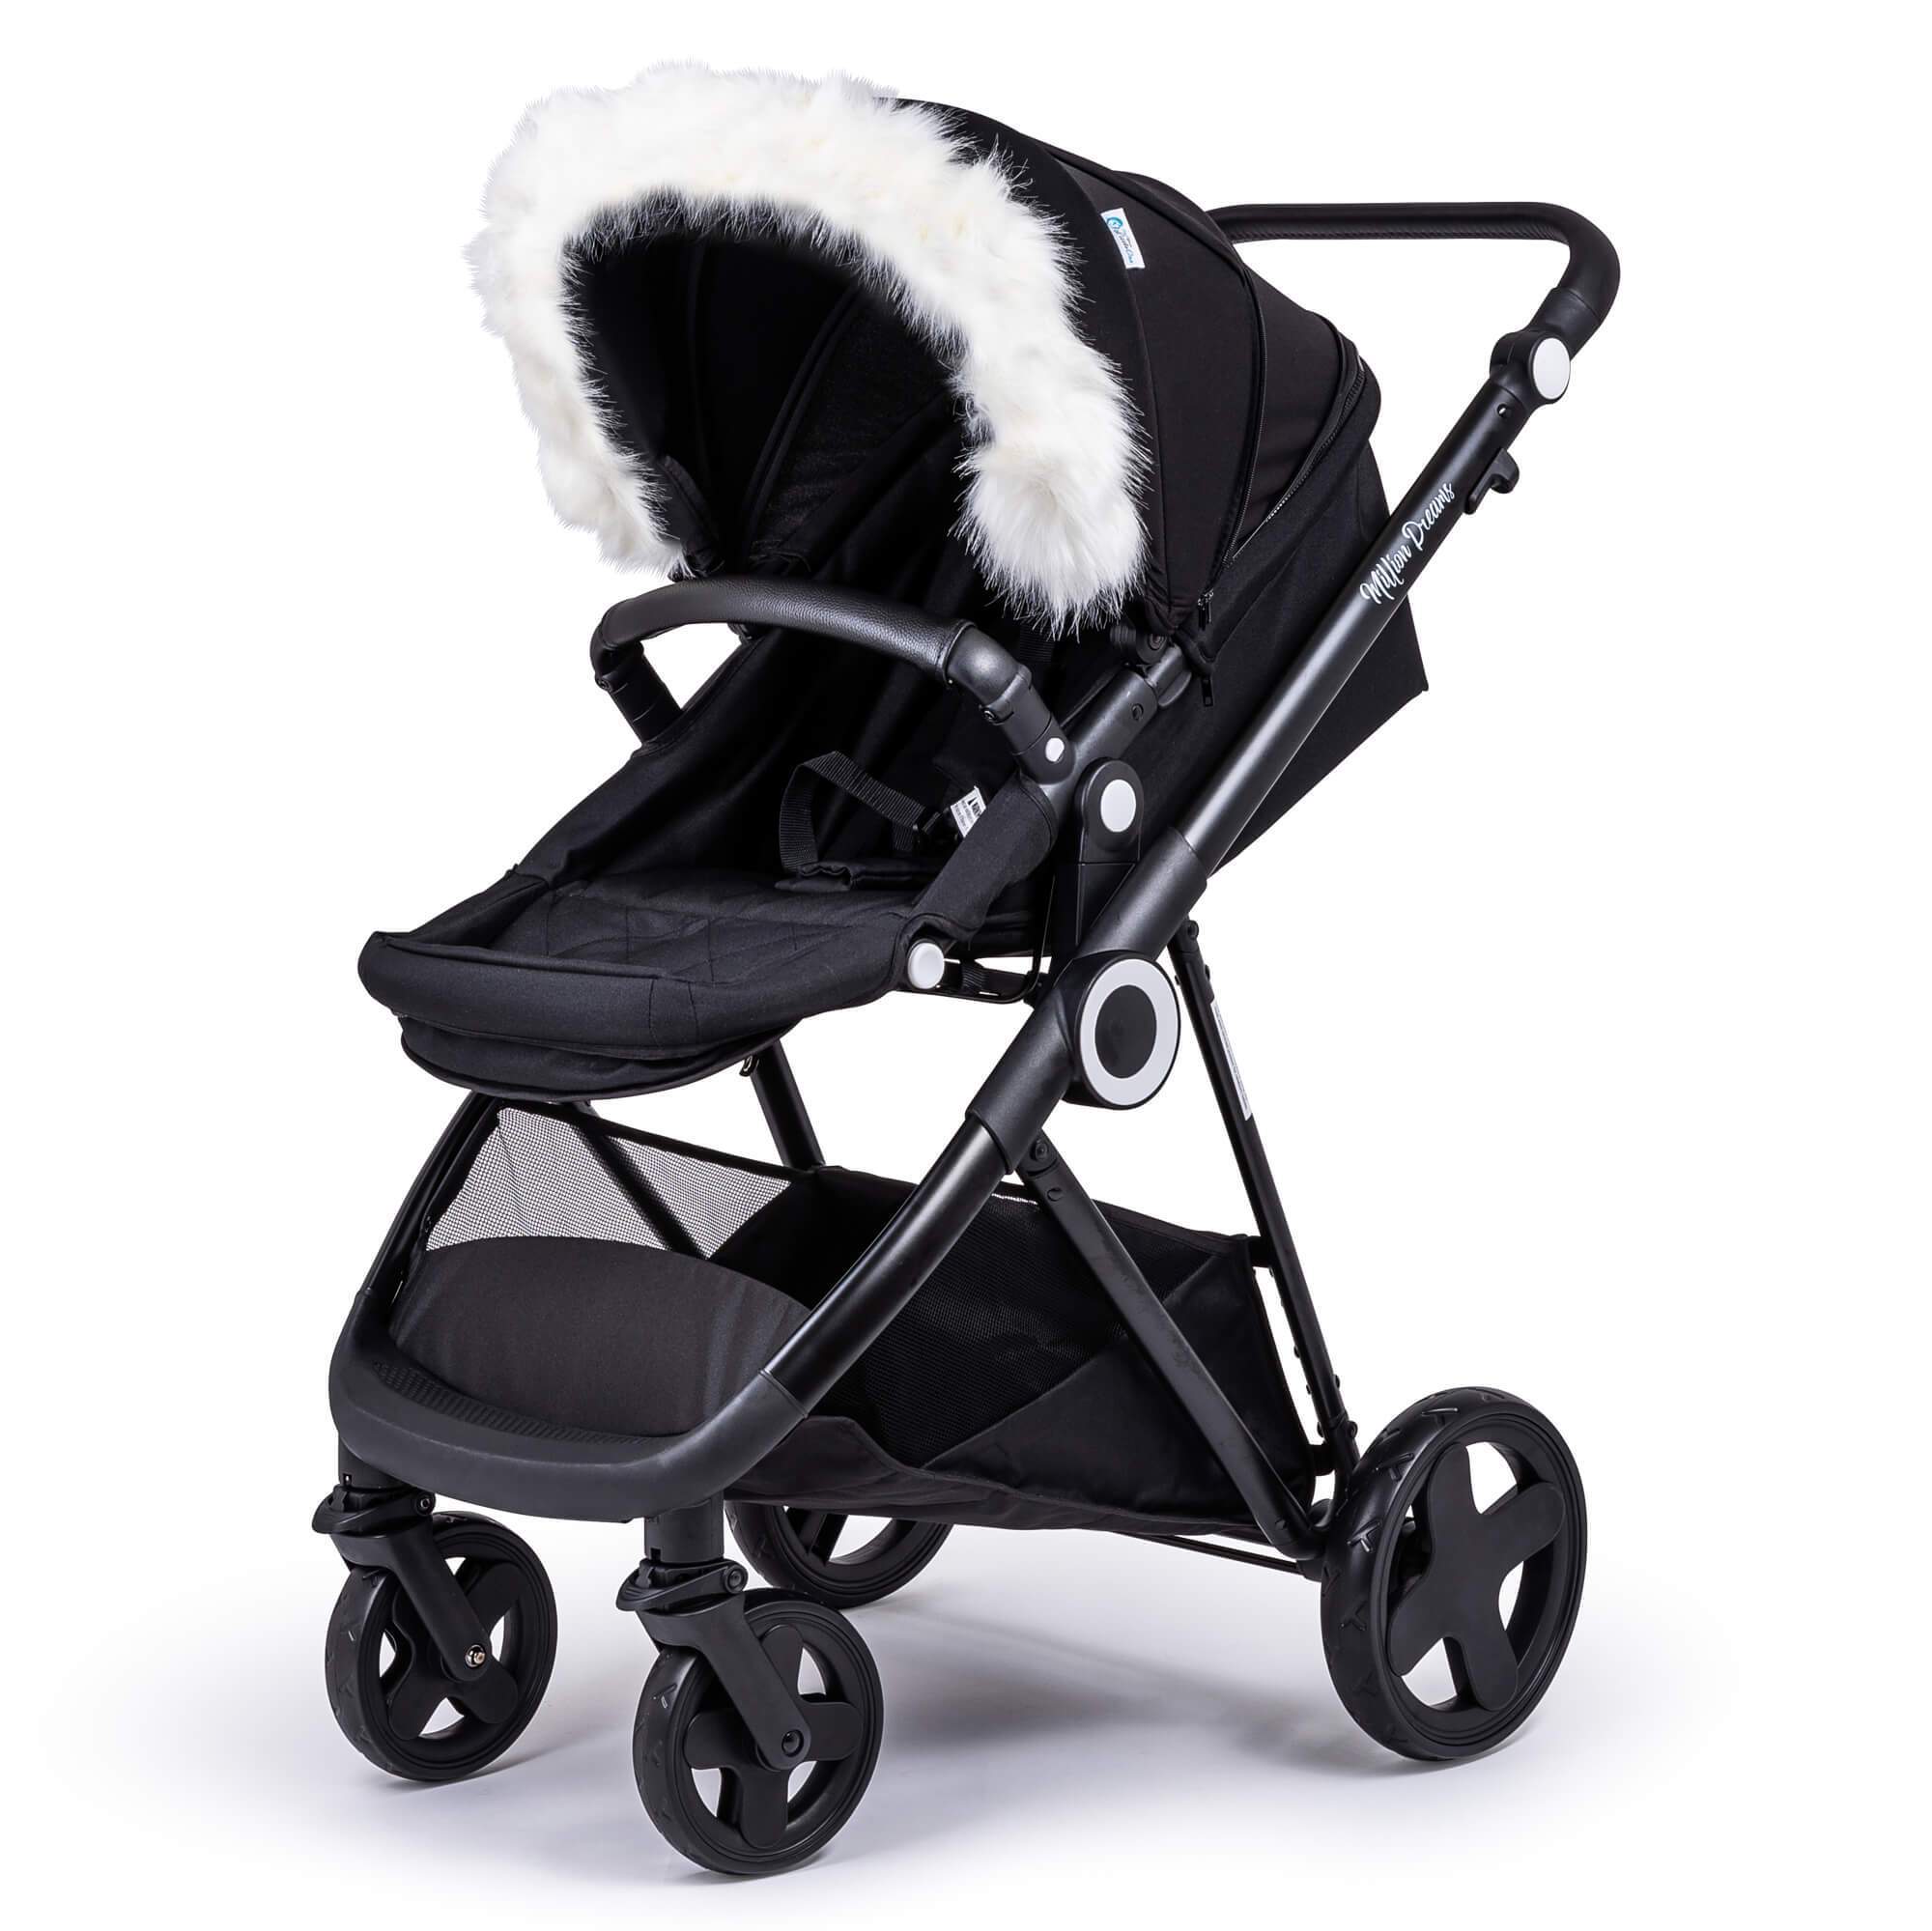 Pram Fur Hood Trim Attachment for Pushchair Compatible with Easywalker - White / Fits All Models | For Your Little One